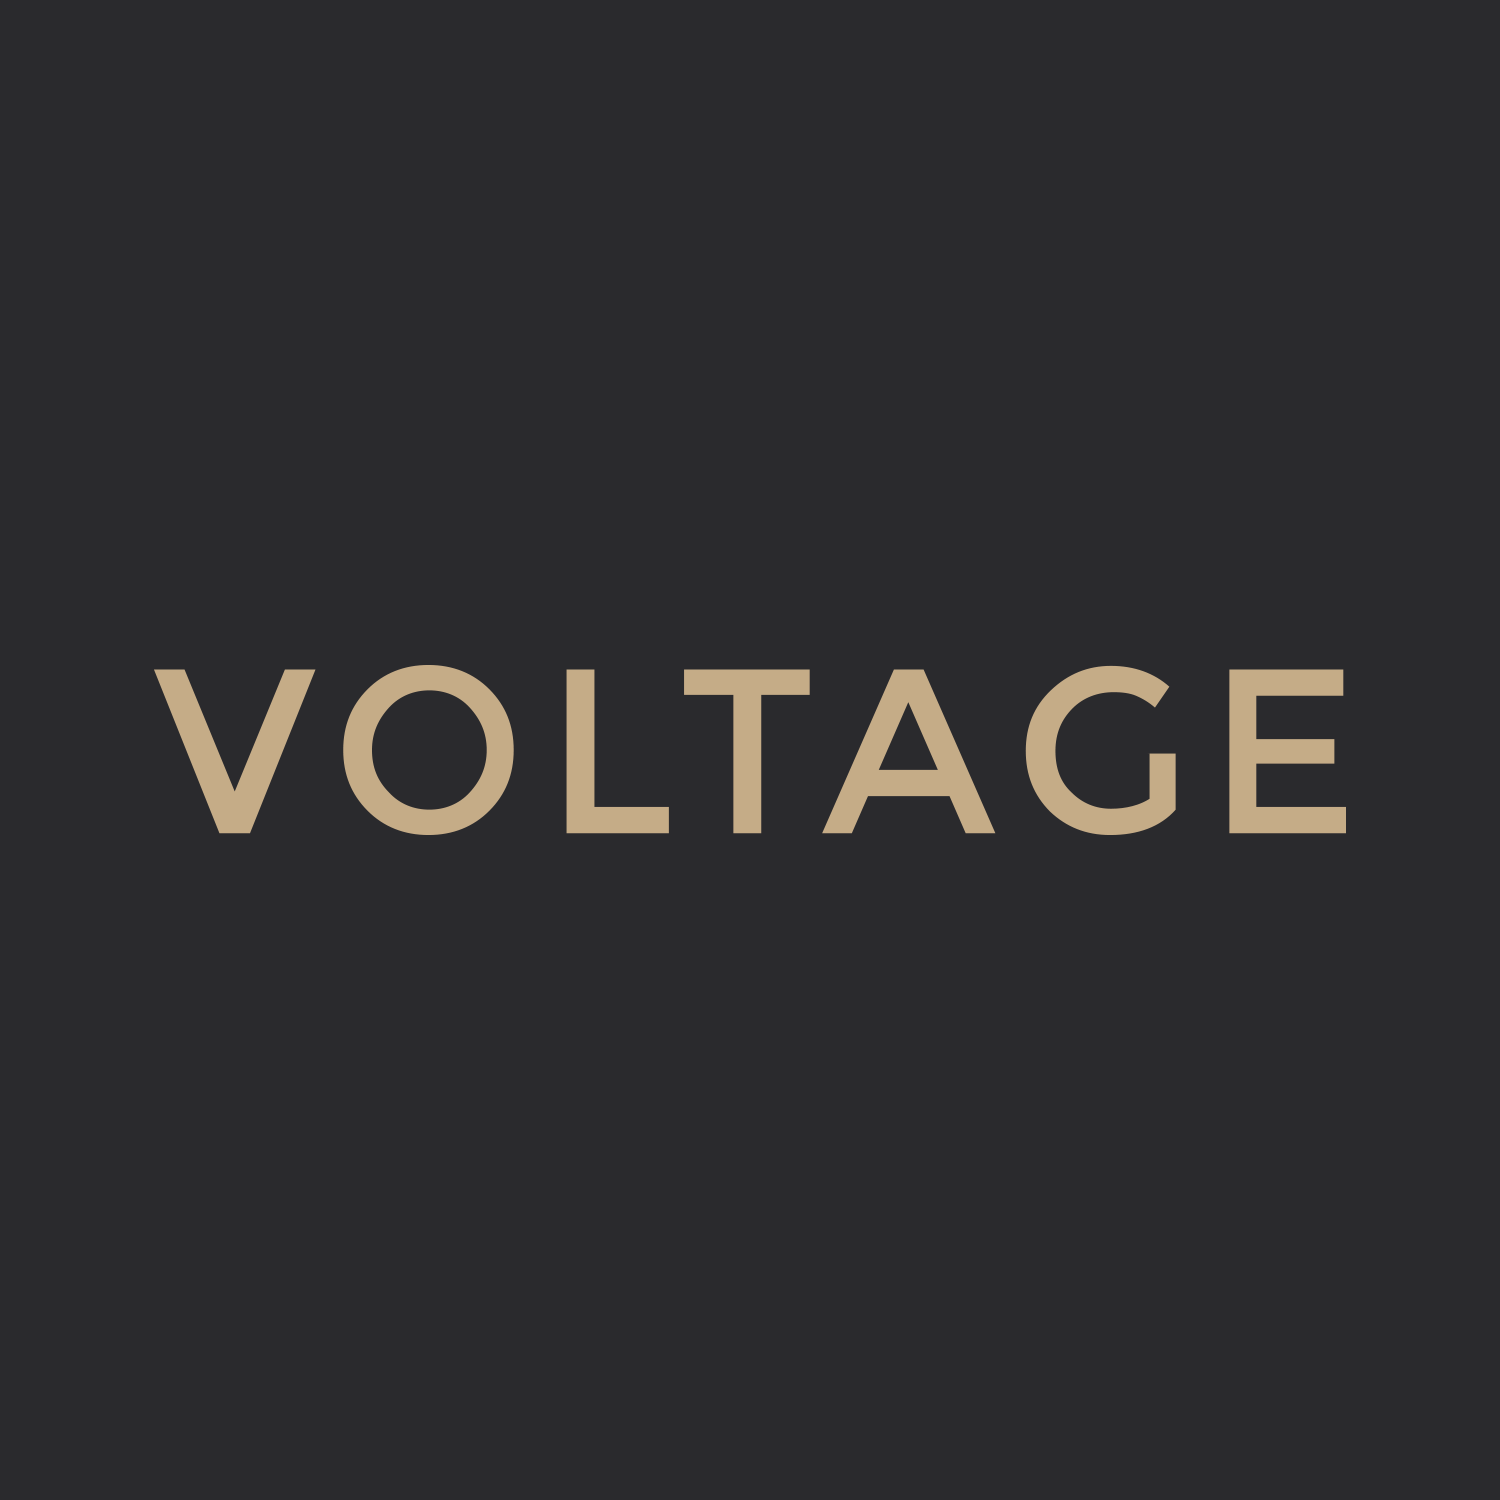 Voltage New Media profile on Qualified.One